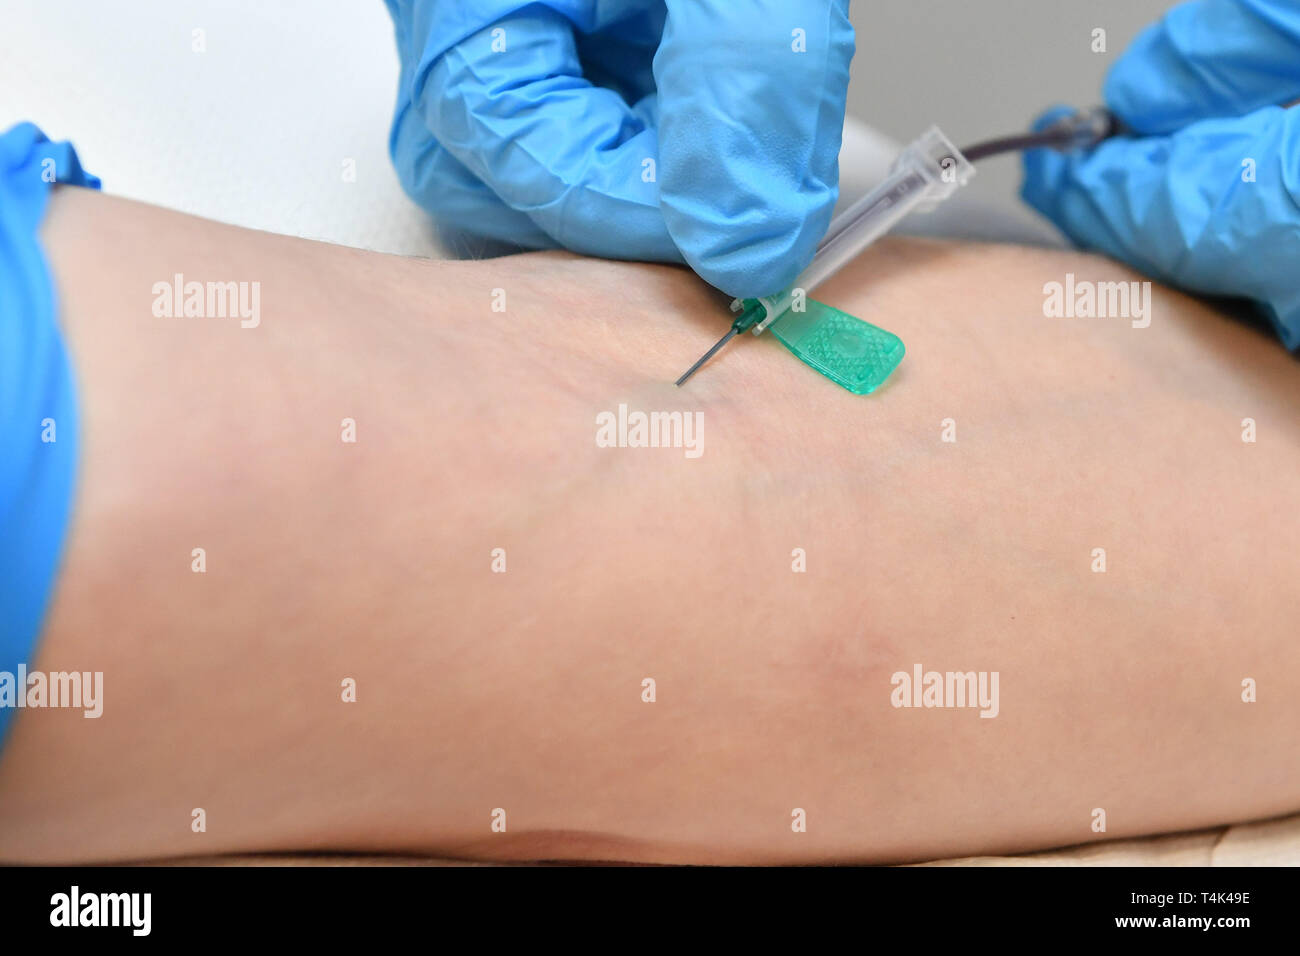 A needle or butterfly cannula is inserted into a vein in an arm to take blood from a patient in a medical clinic, based at University of Bristol. PRESS ASSOCIATION Photo. Picture date: Monday April 8, 2019. Photo credit should read: Ben Birchall Stock Photo